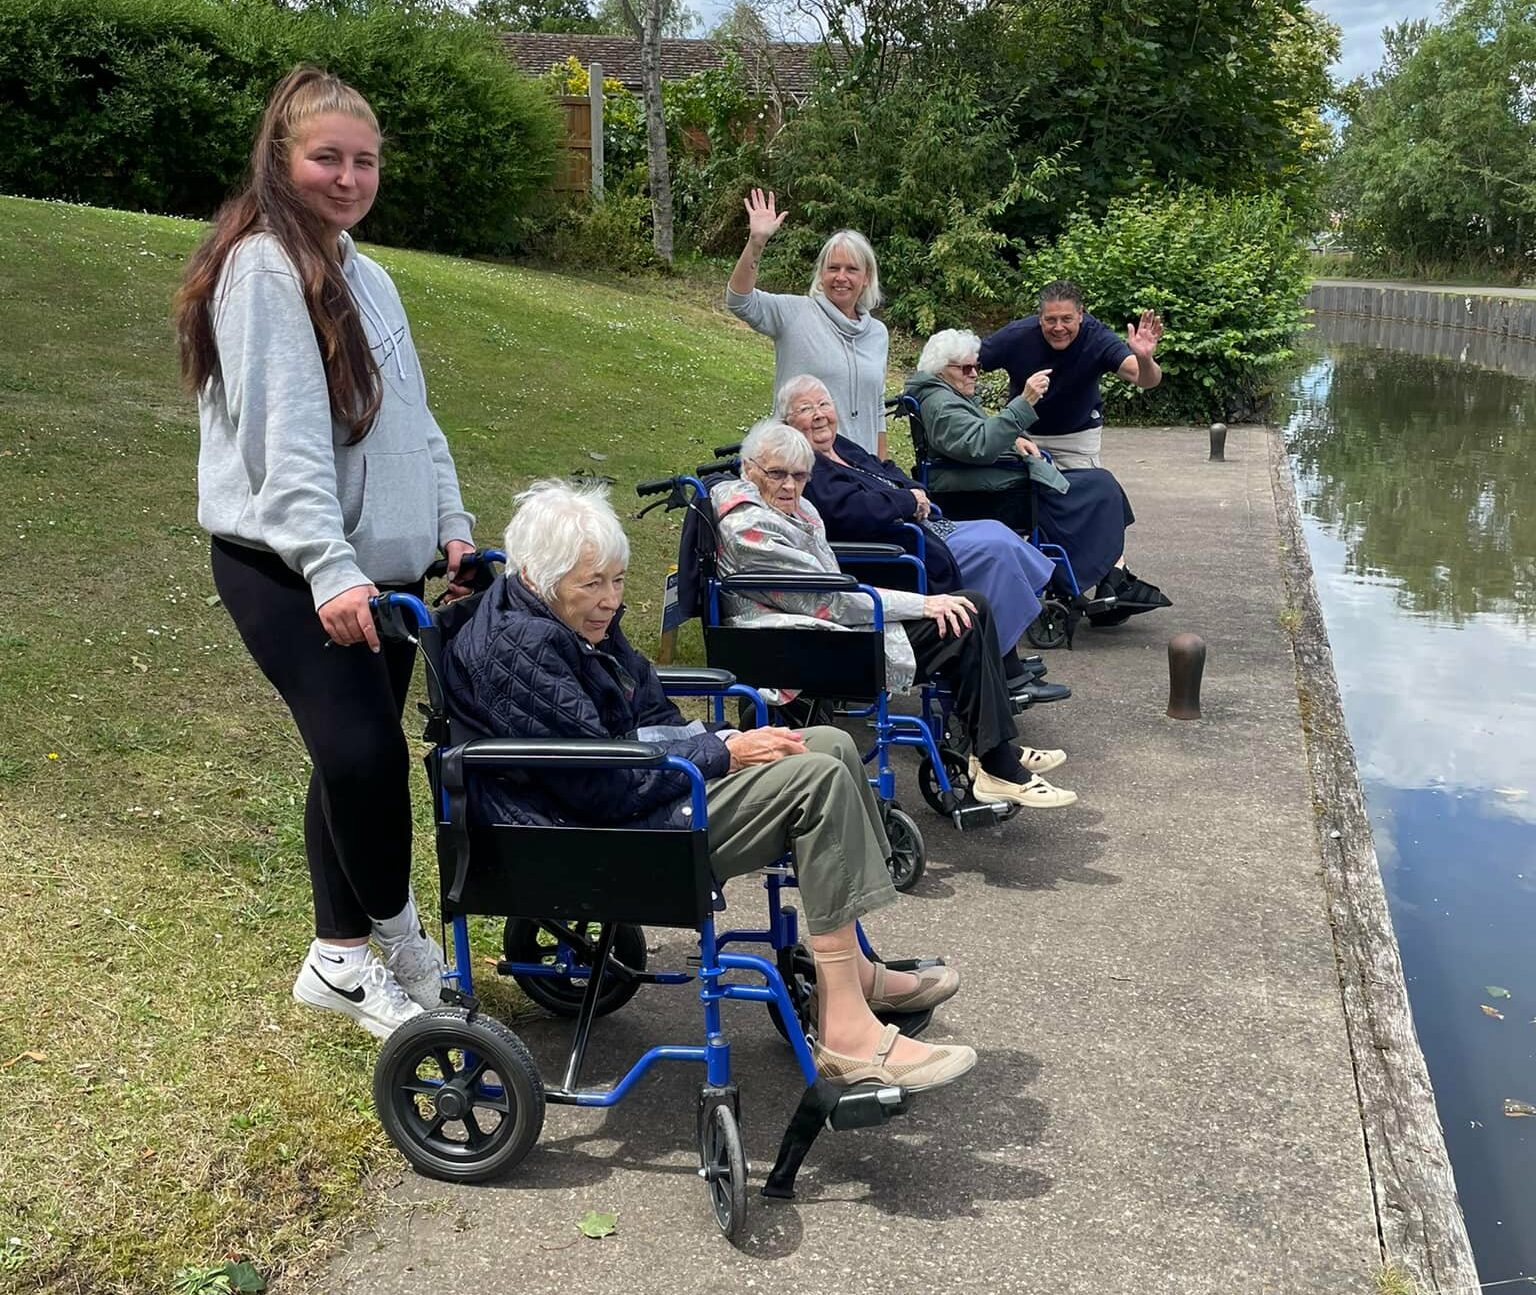 Residents waiting for canal boat